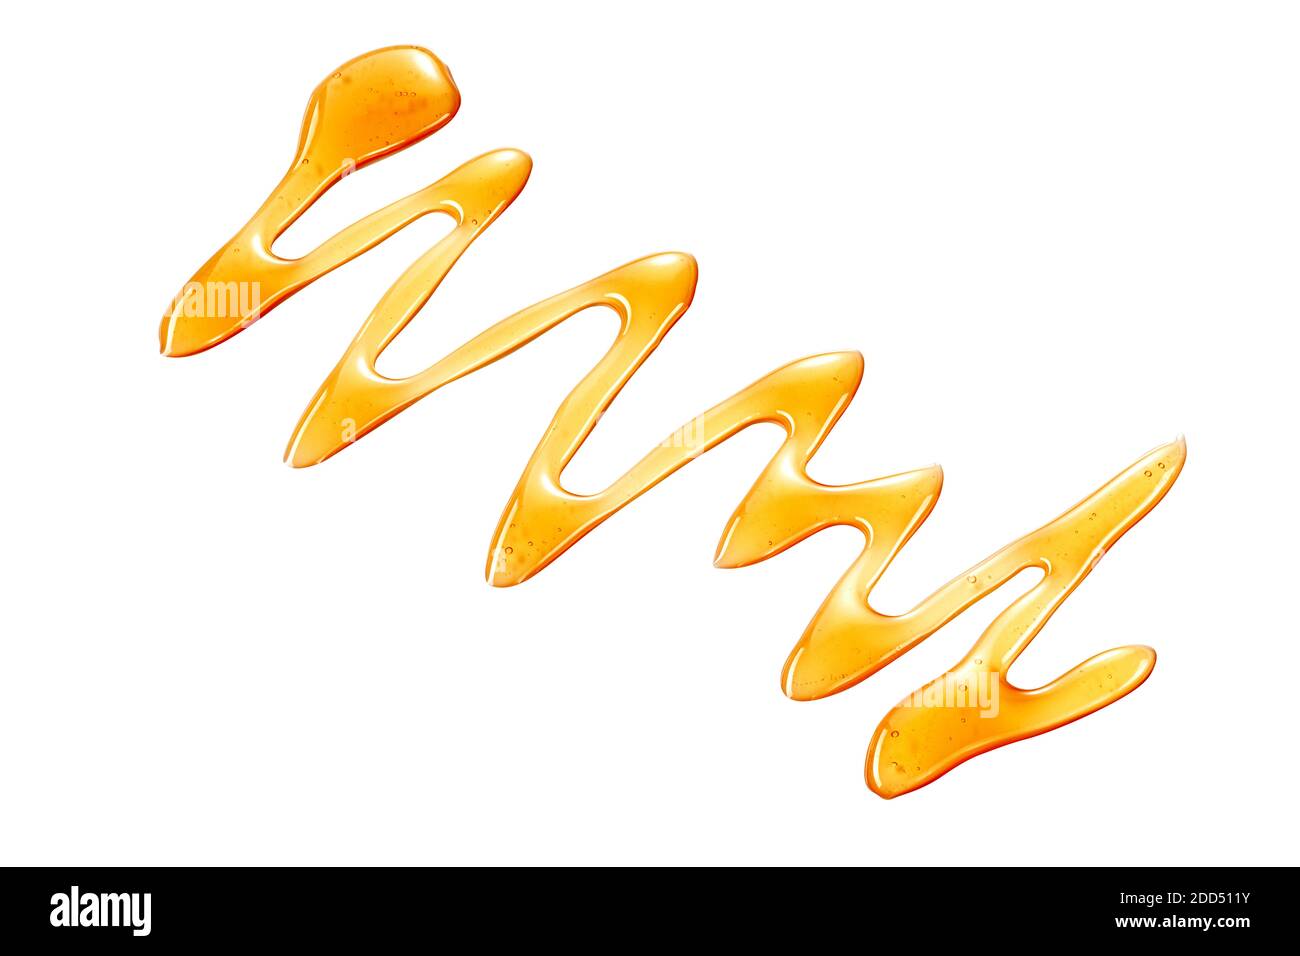 Diagonal wavy line of golden honey drizzled on white with copyspace in an overhead view for advertising Stock Photo